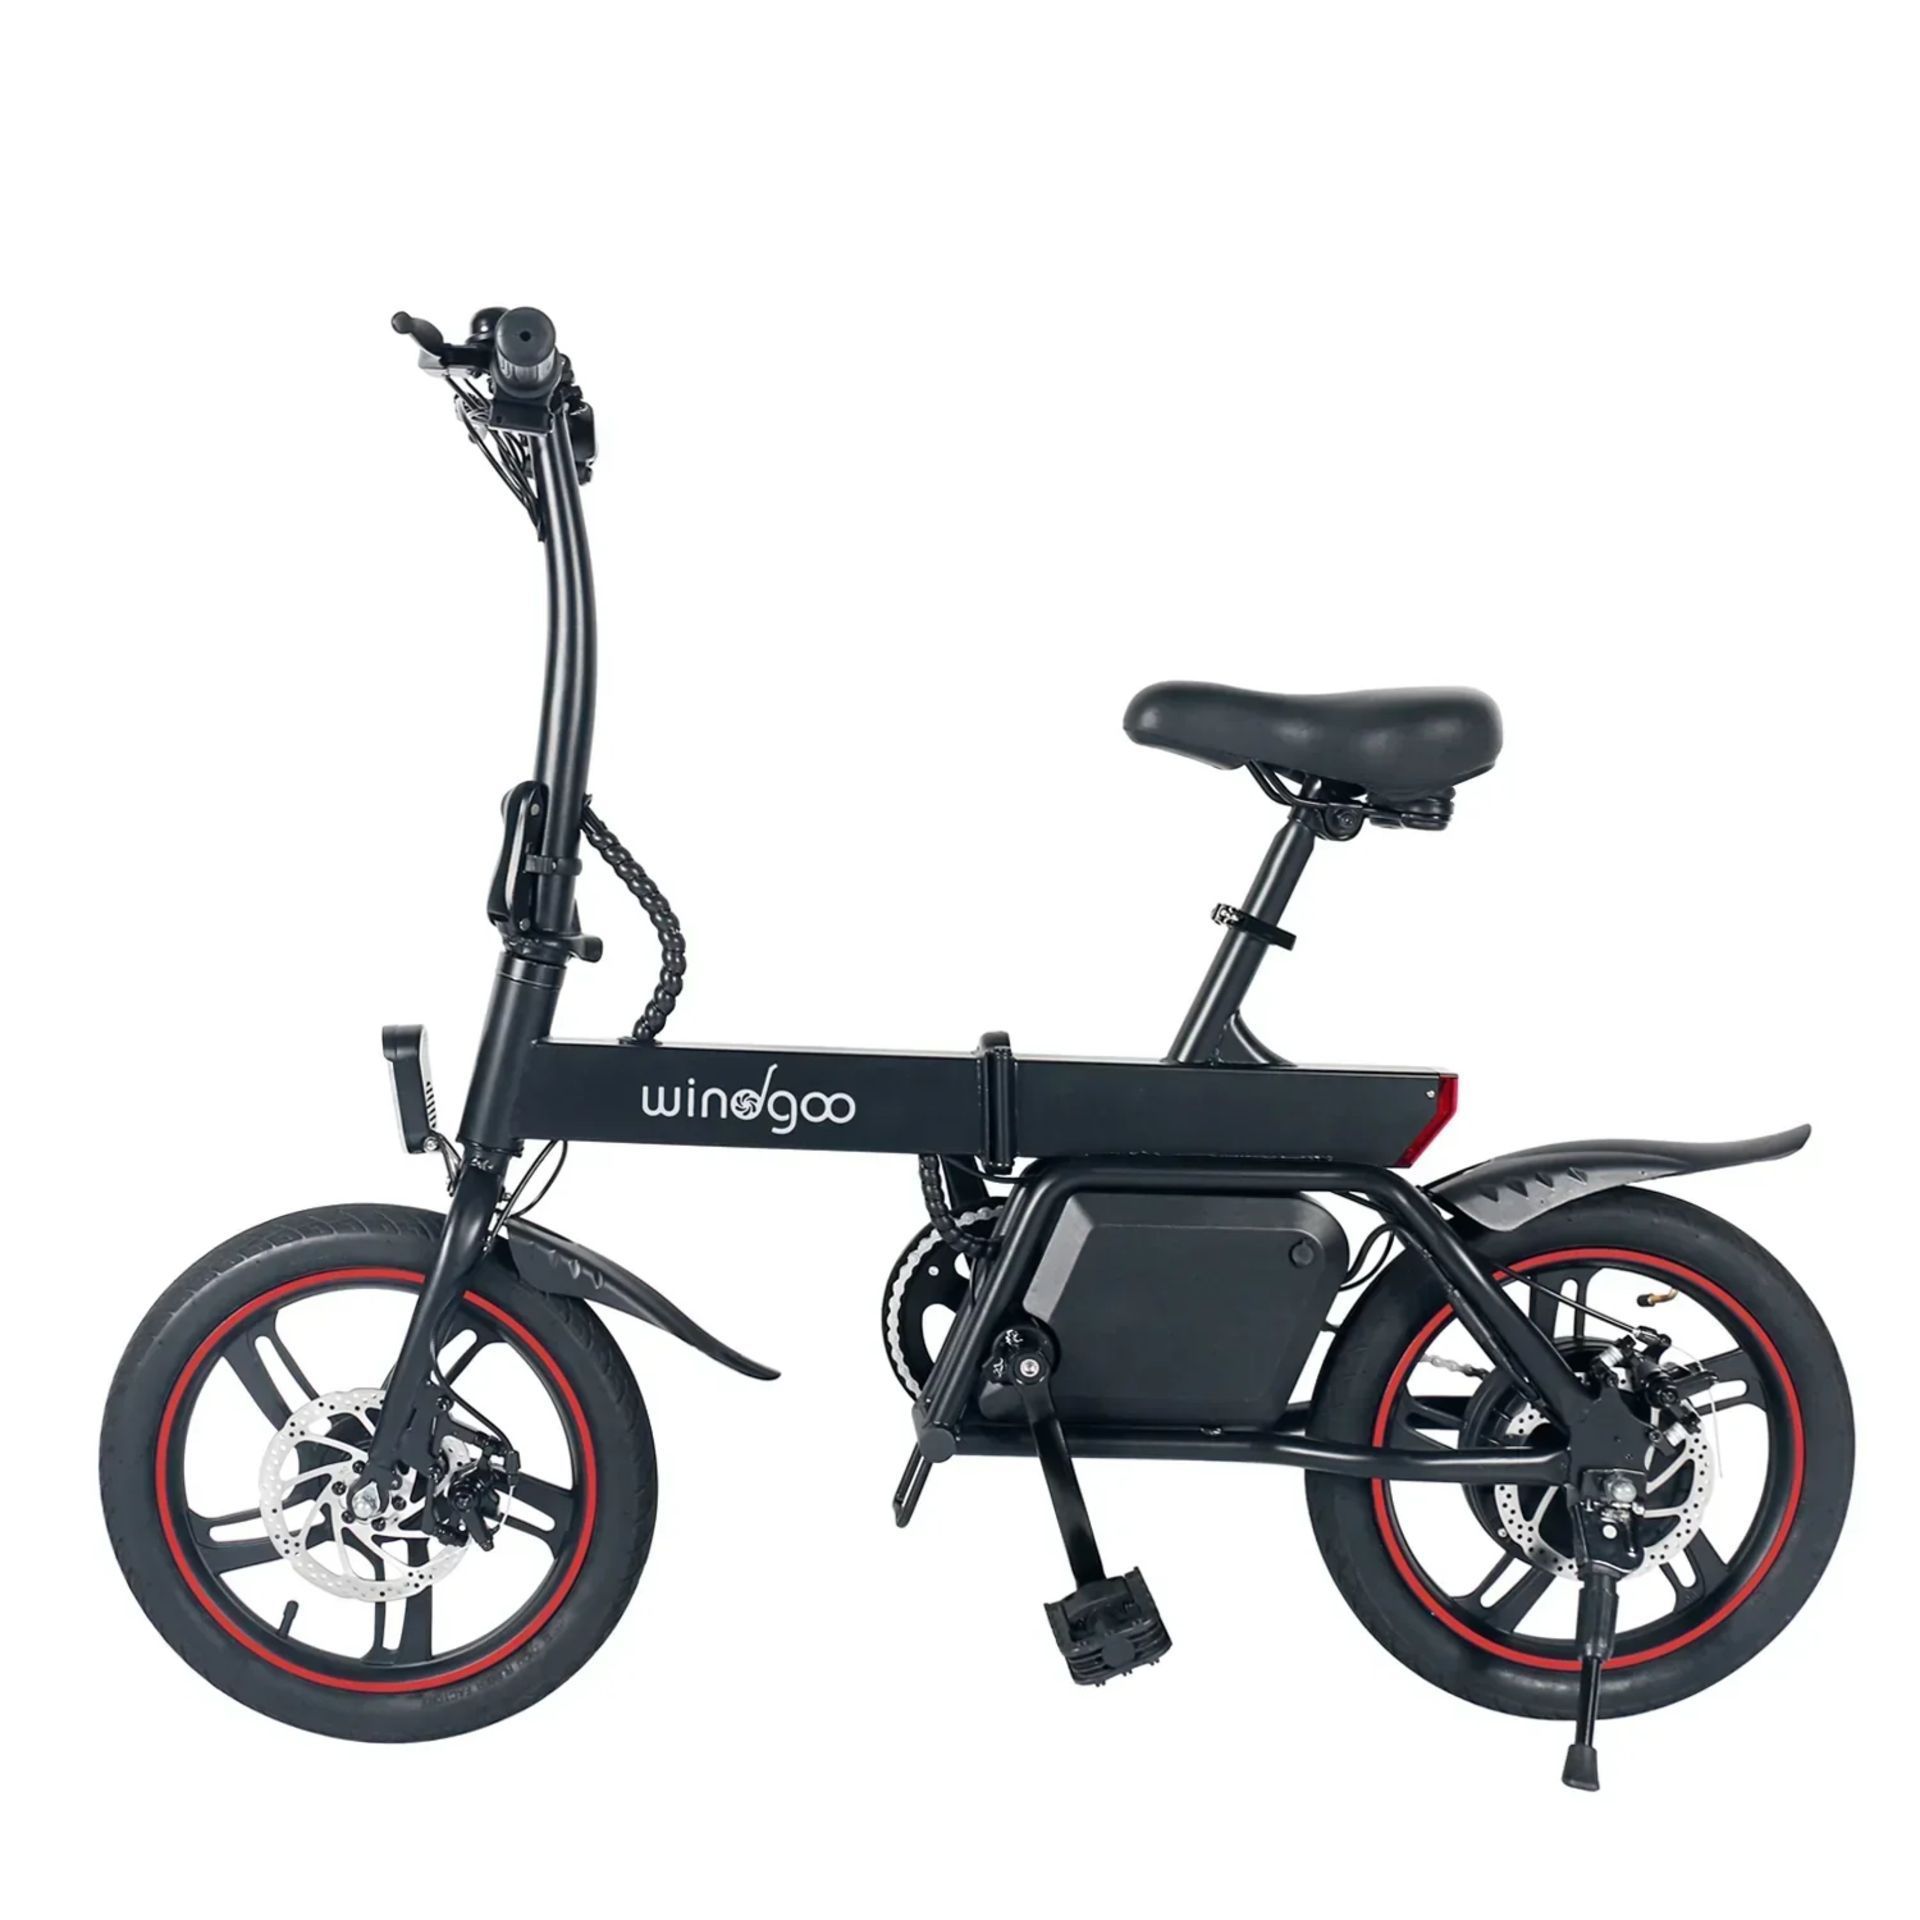 Windgoo B20 Pro Electric Bike. RRP £1,100.99. With 16-inch-wide tires and a frame of upgraded - Image 6 of 6